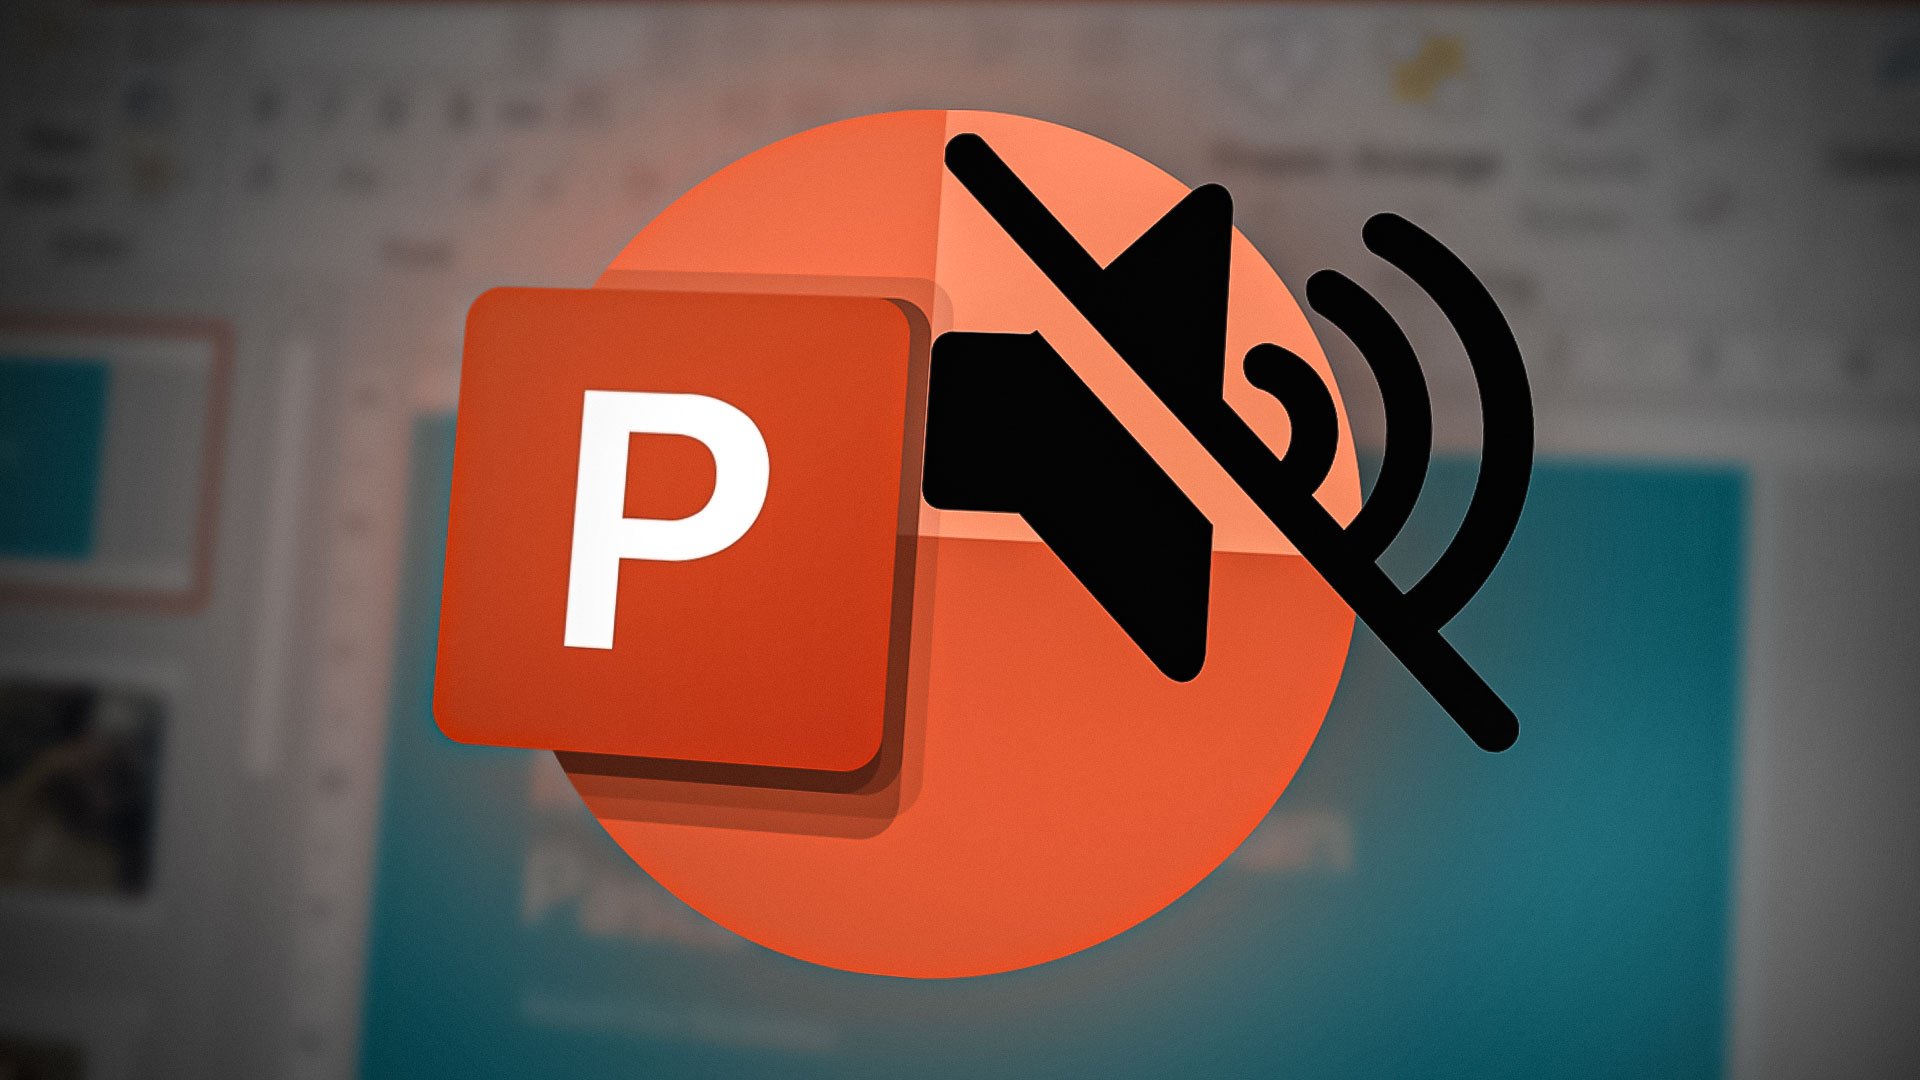 How To Fix Music And Sound In PowerPoint